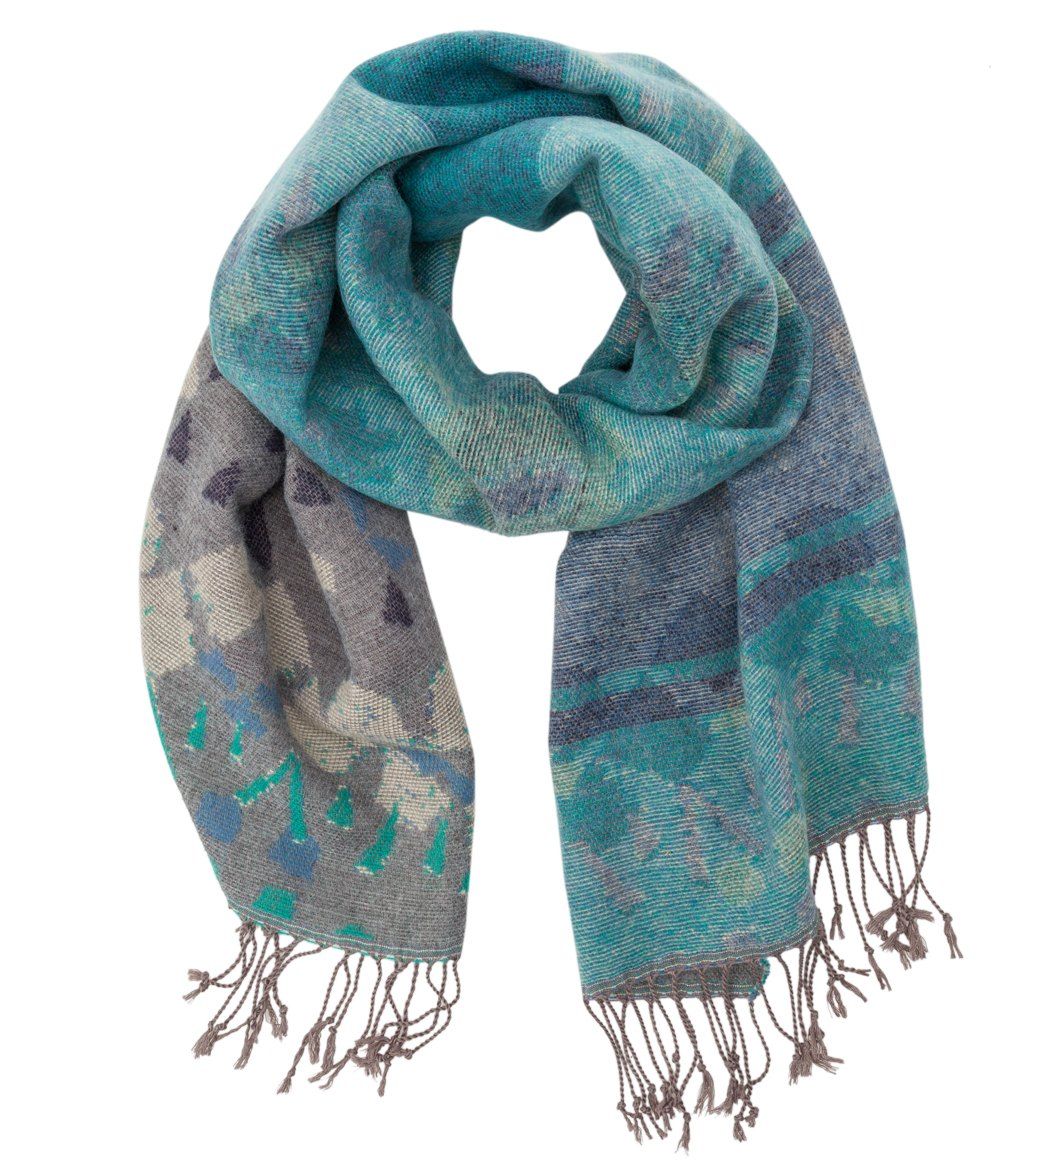 Roxy Warm Heart Scarf at SwimOutlet.com